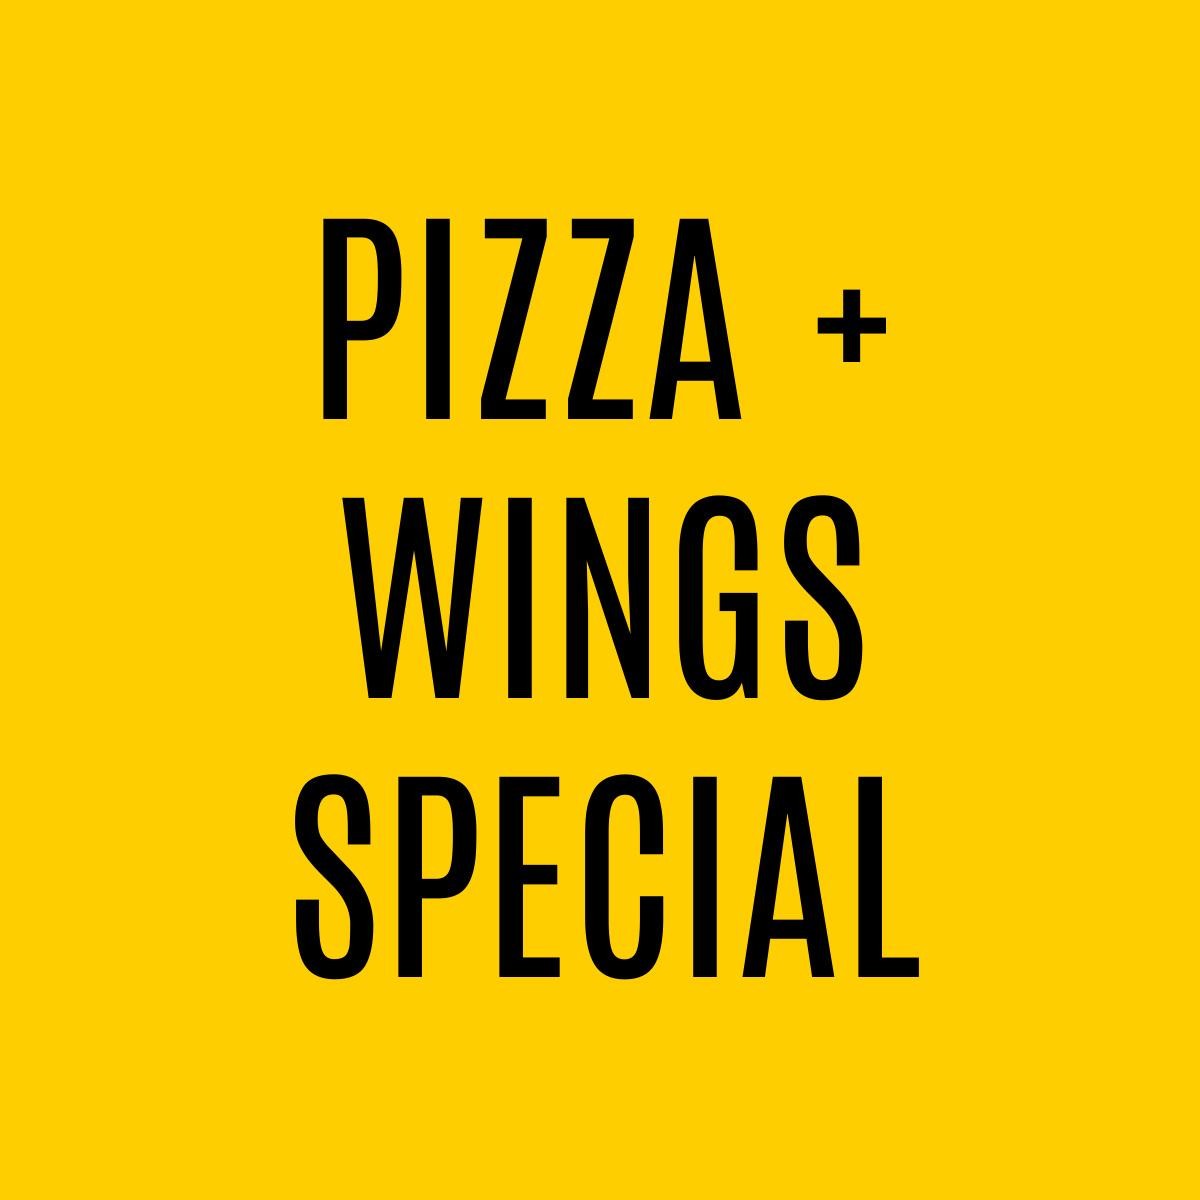 Pizza & Wings Special